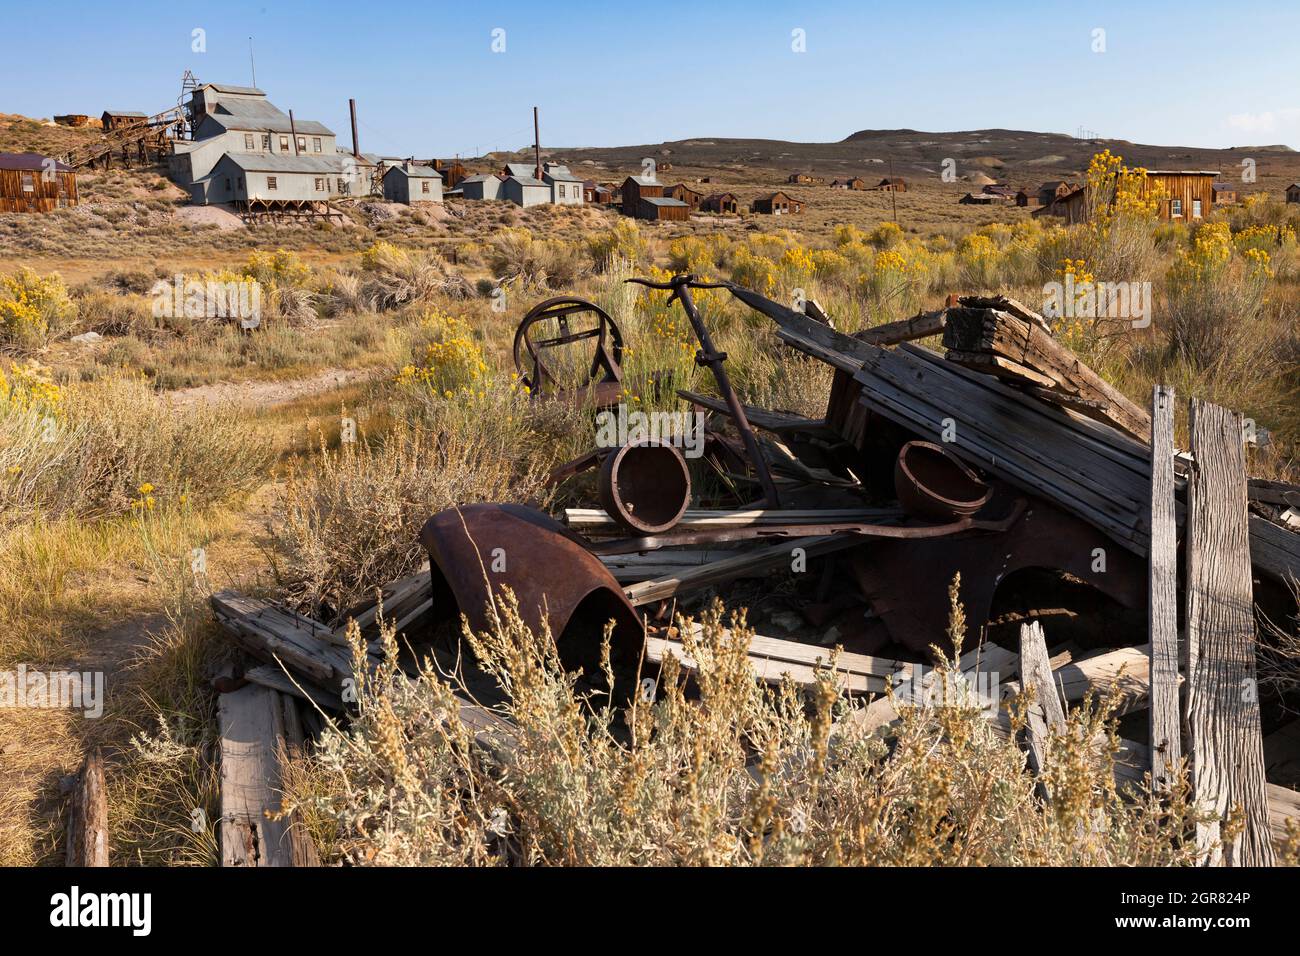 The rusted headlights, fenders, and steering wheel are all that remain an automobile in Bodie. Stock Photo